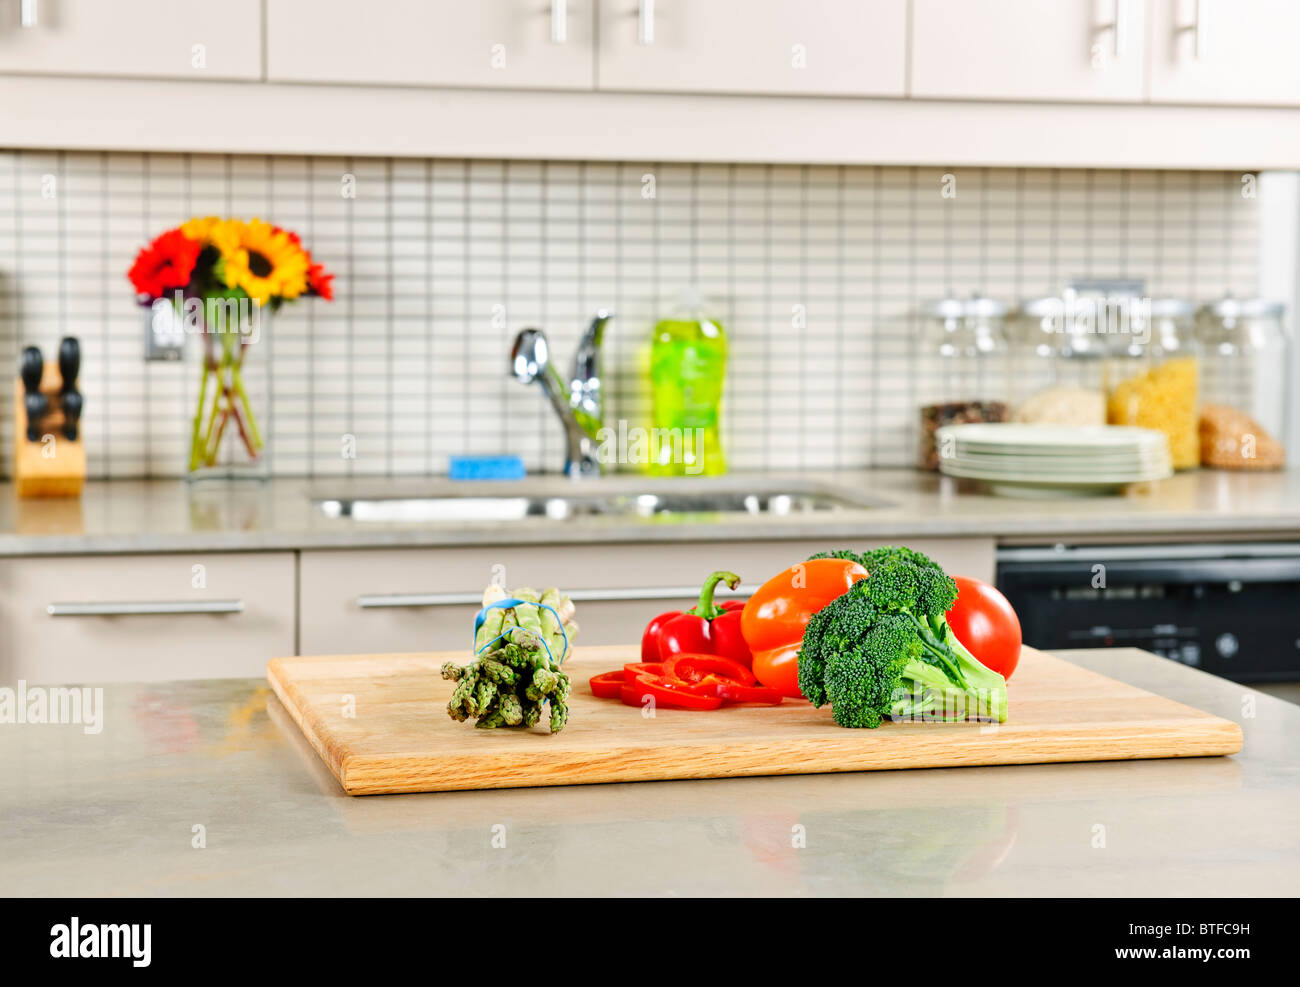 Modern kitchen interior with fresh vegetables on natural stone countertop Stock Photo